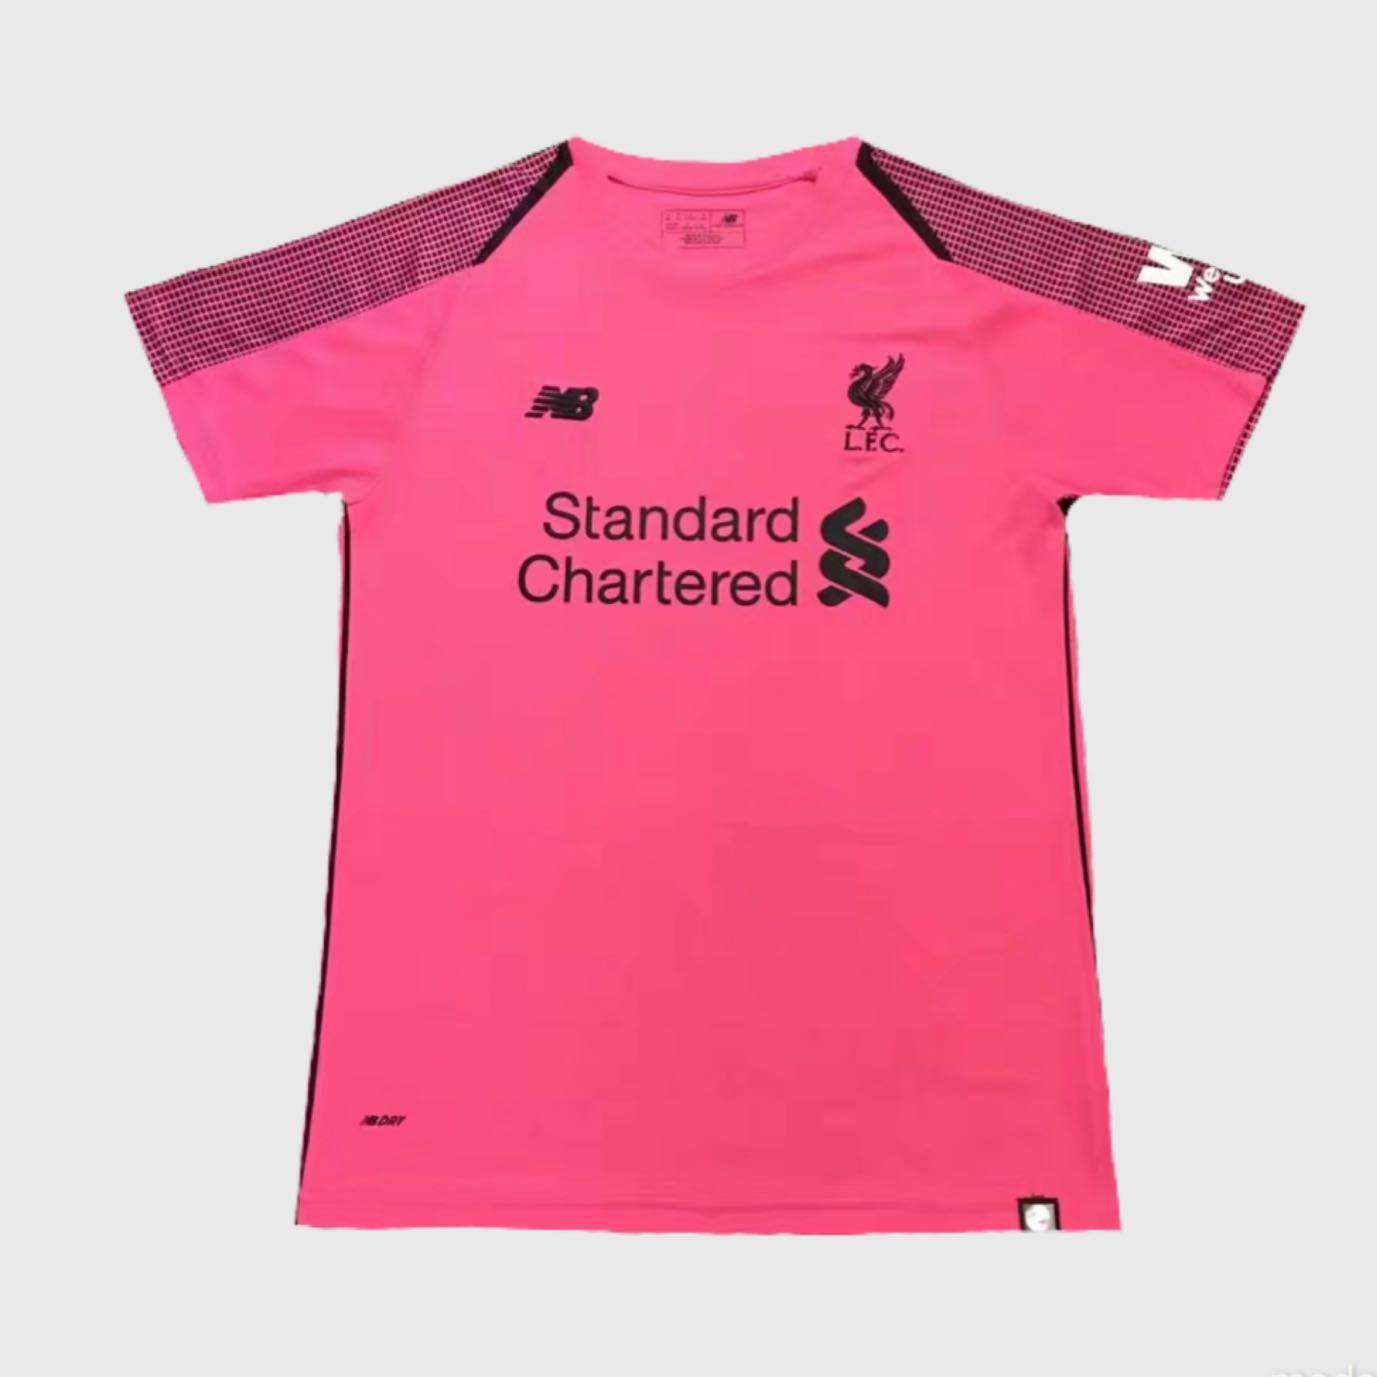 liverpool youth goalkeeper kit